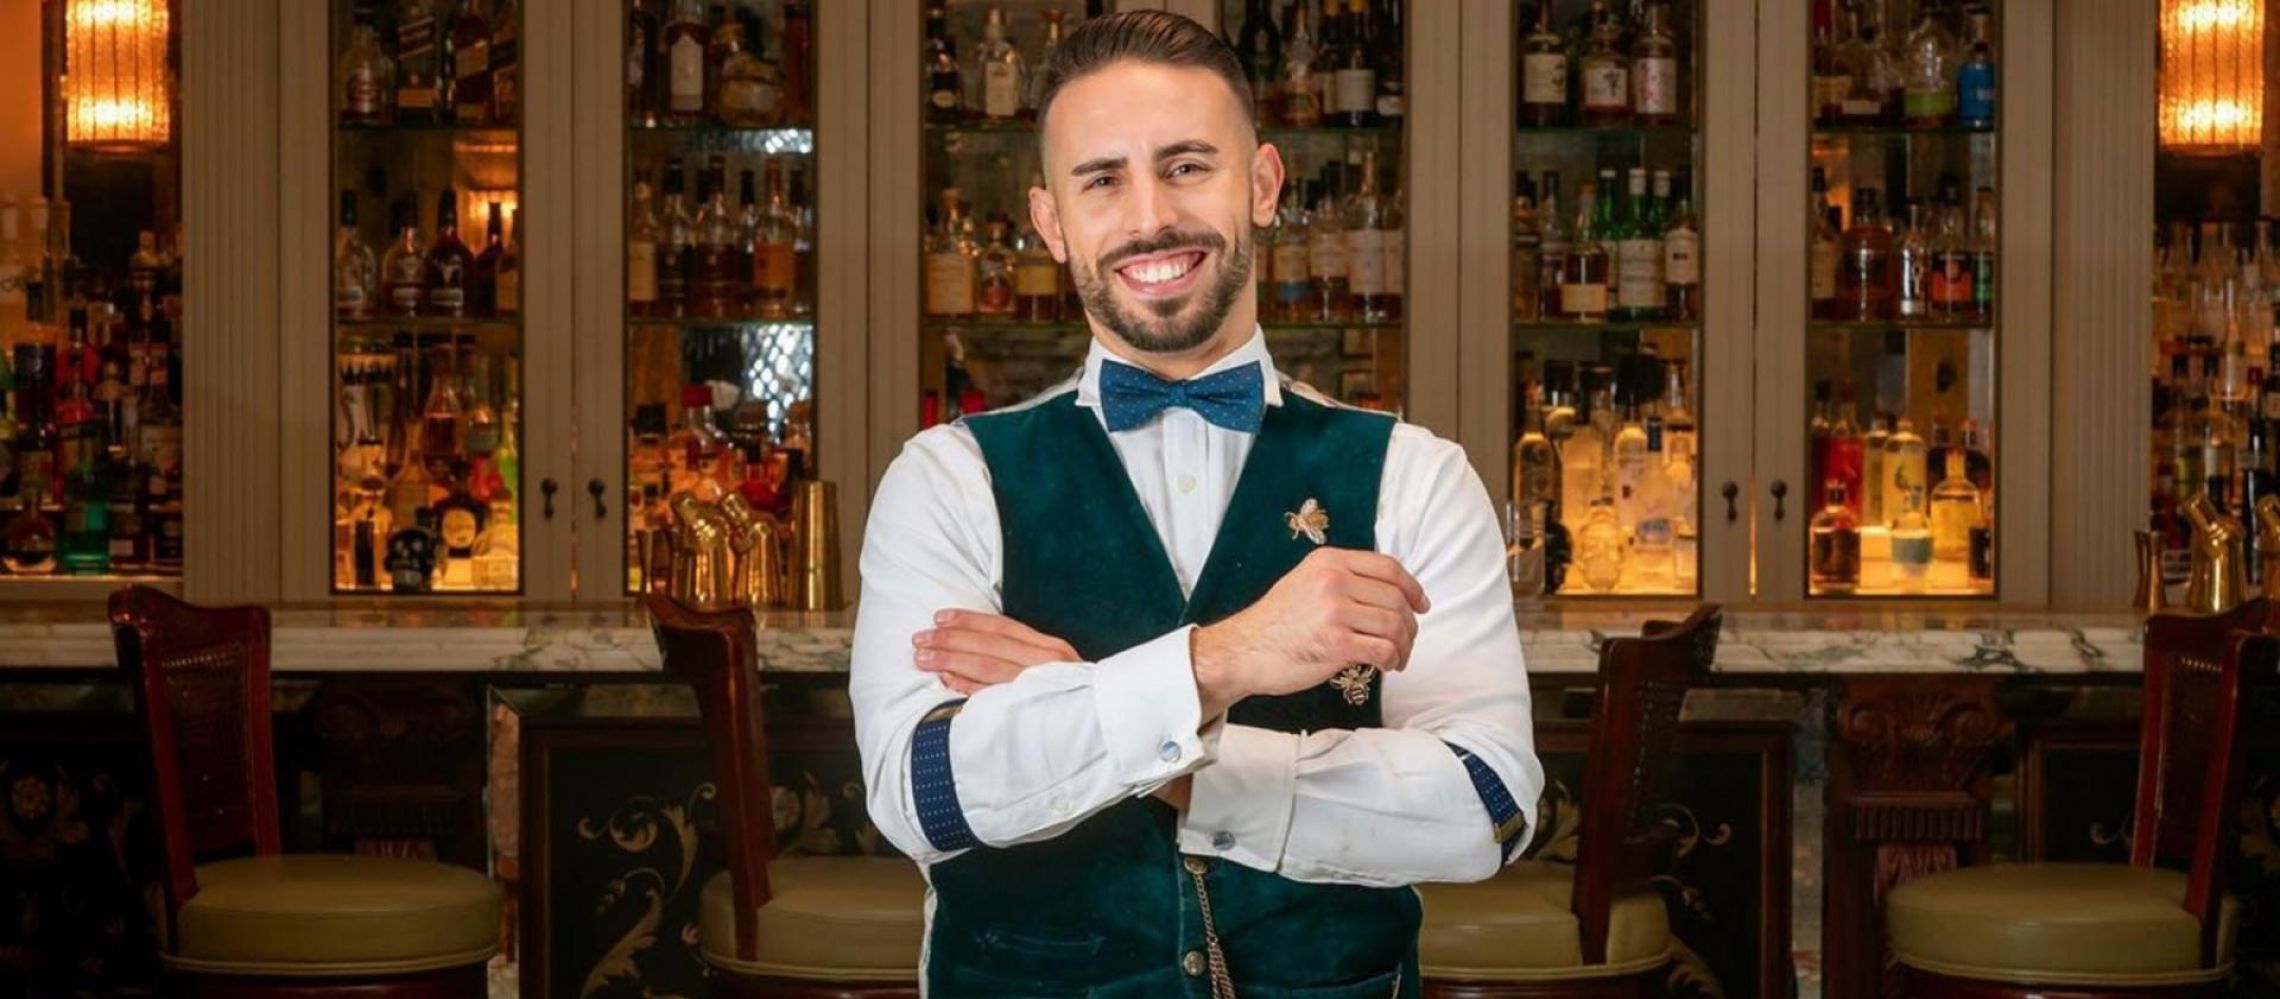 Photo for: Bartending with Paulo Azevedo, Head Bartender at Bacchanalia